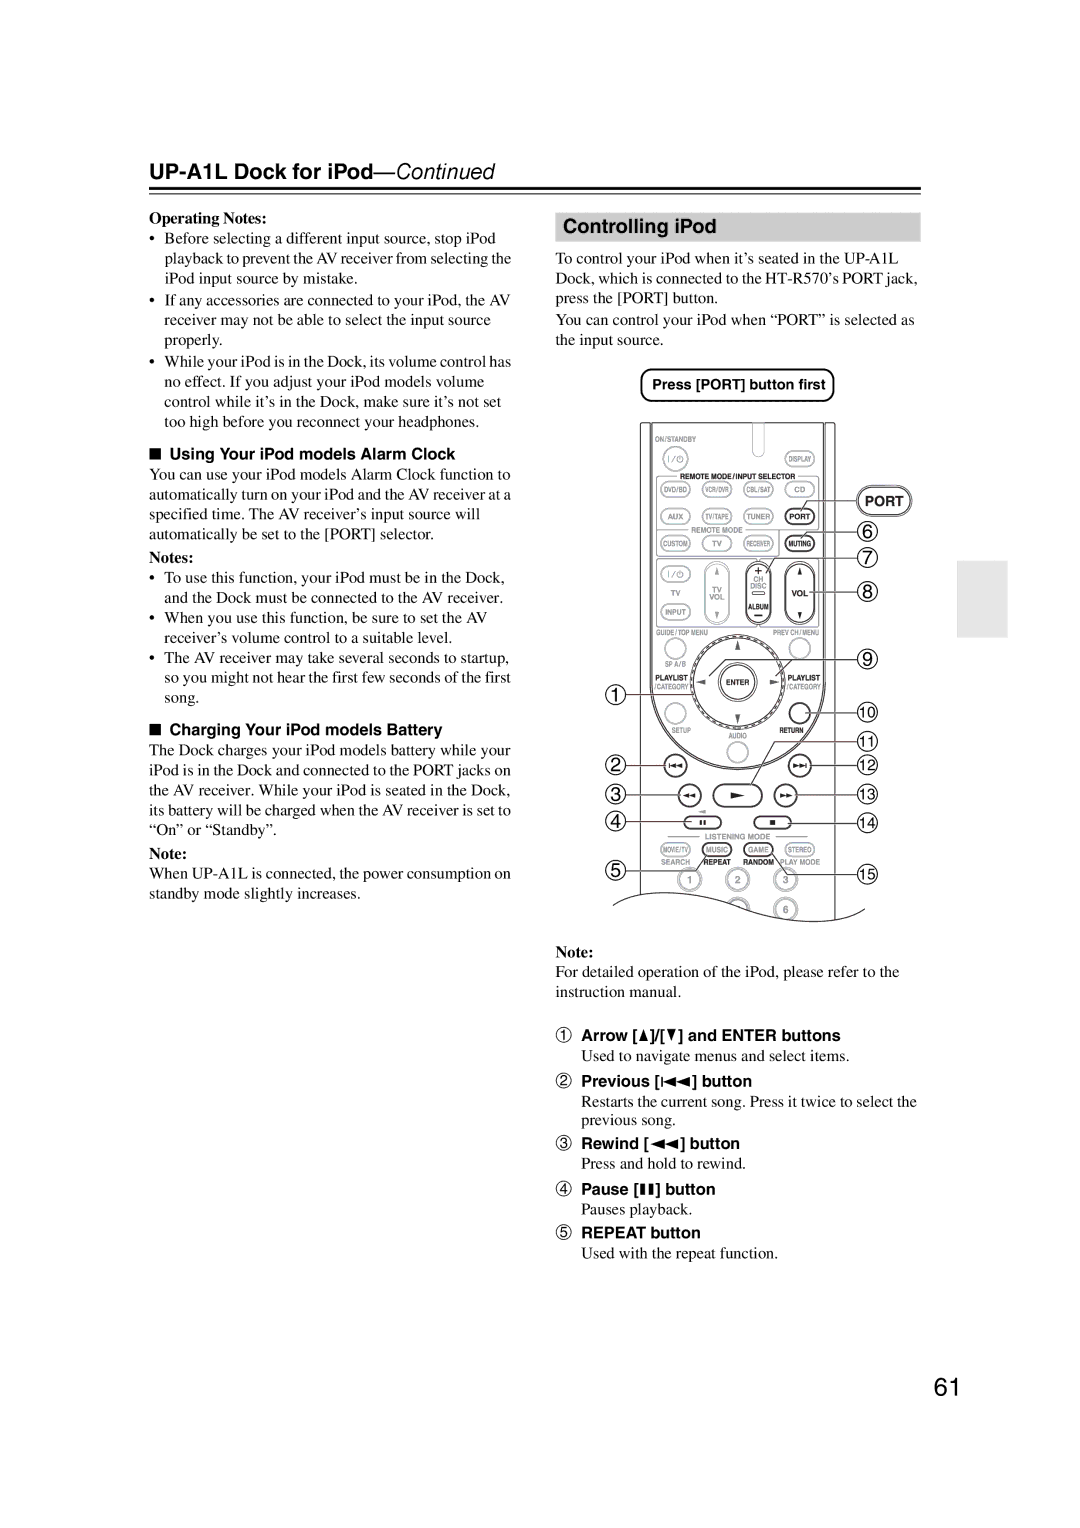 Onkyo HT-S5200 instruction manual UP-A1L Dock for iPod, Controlling iPod 